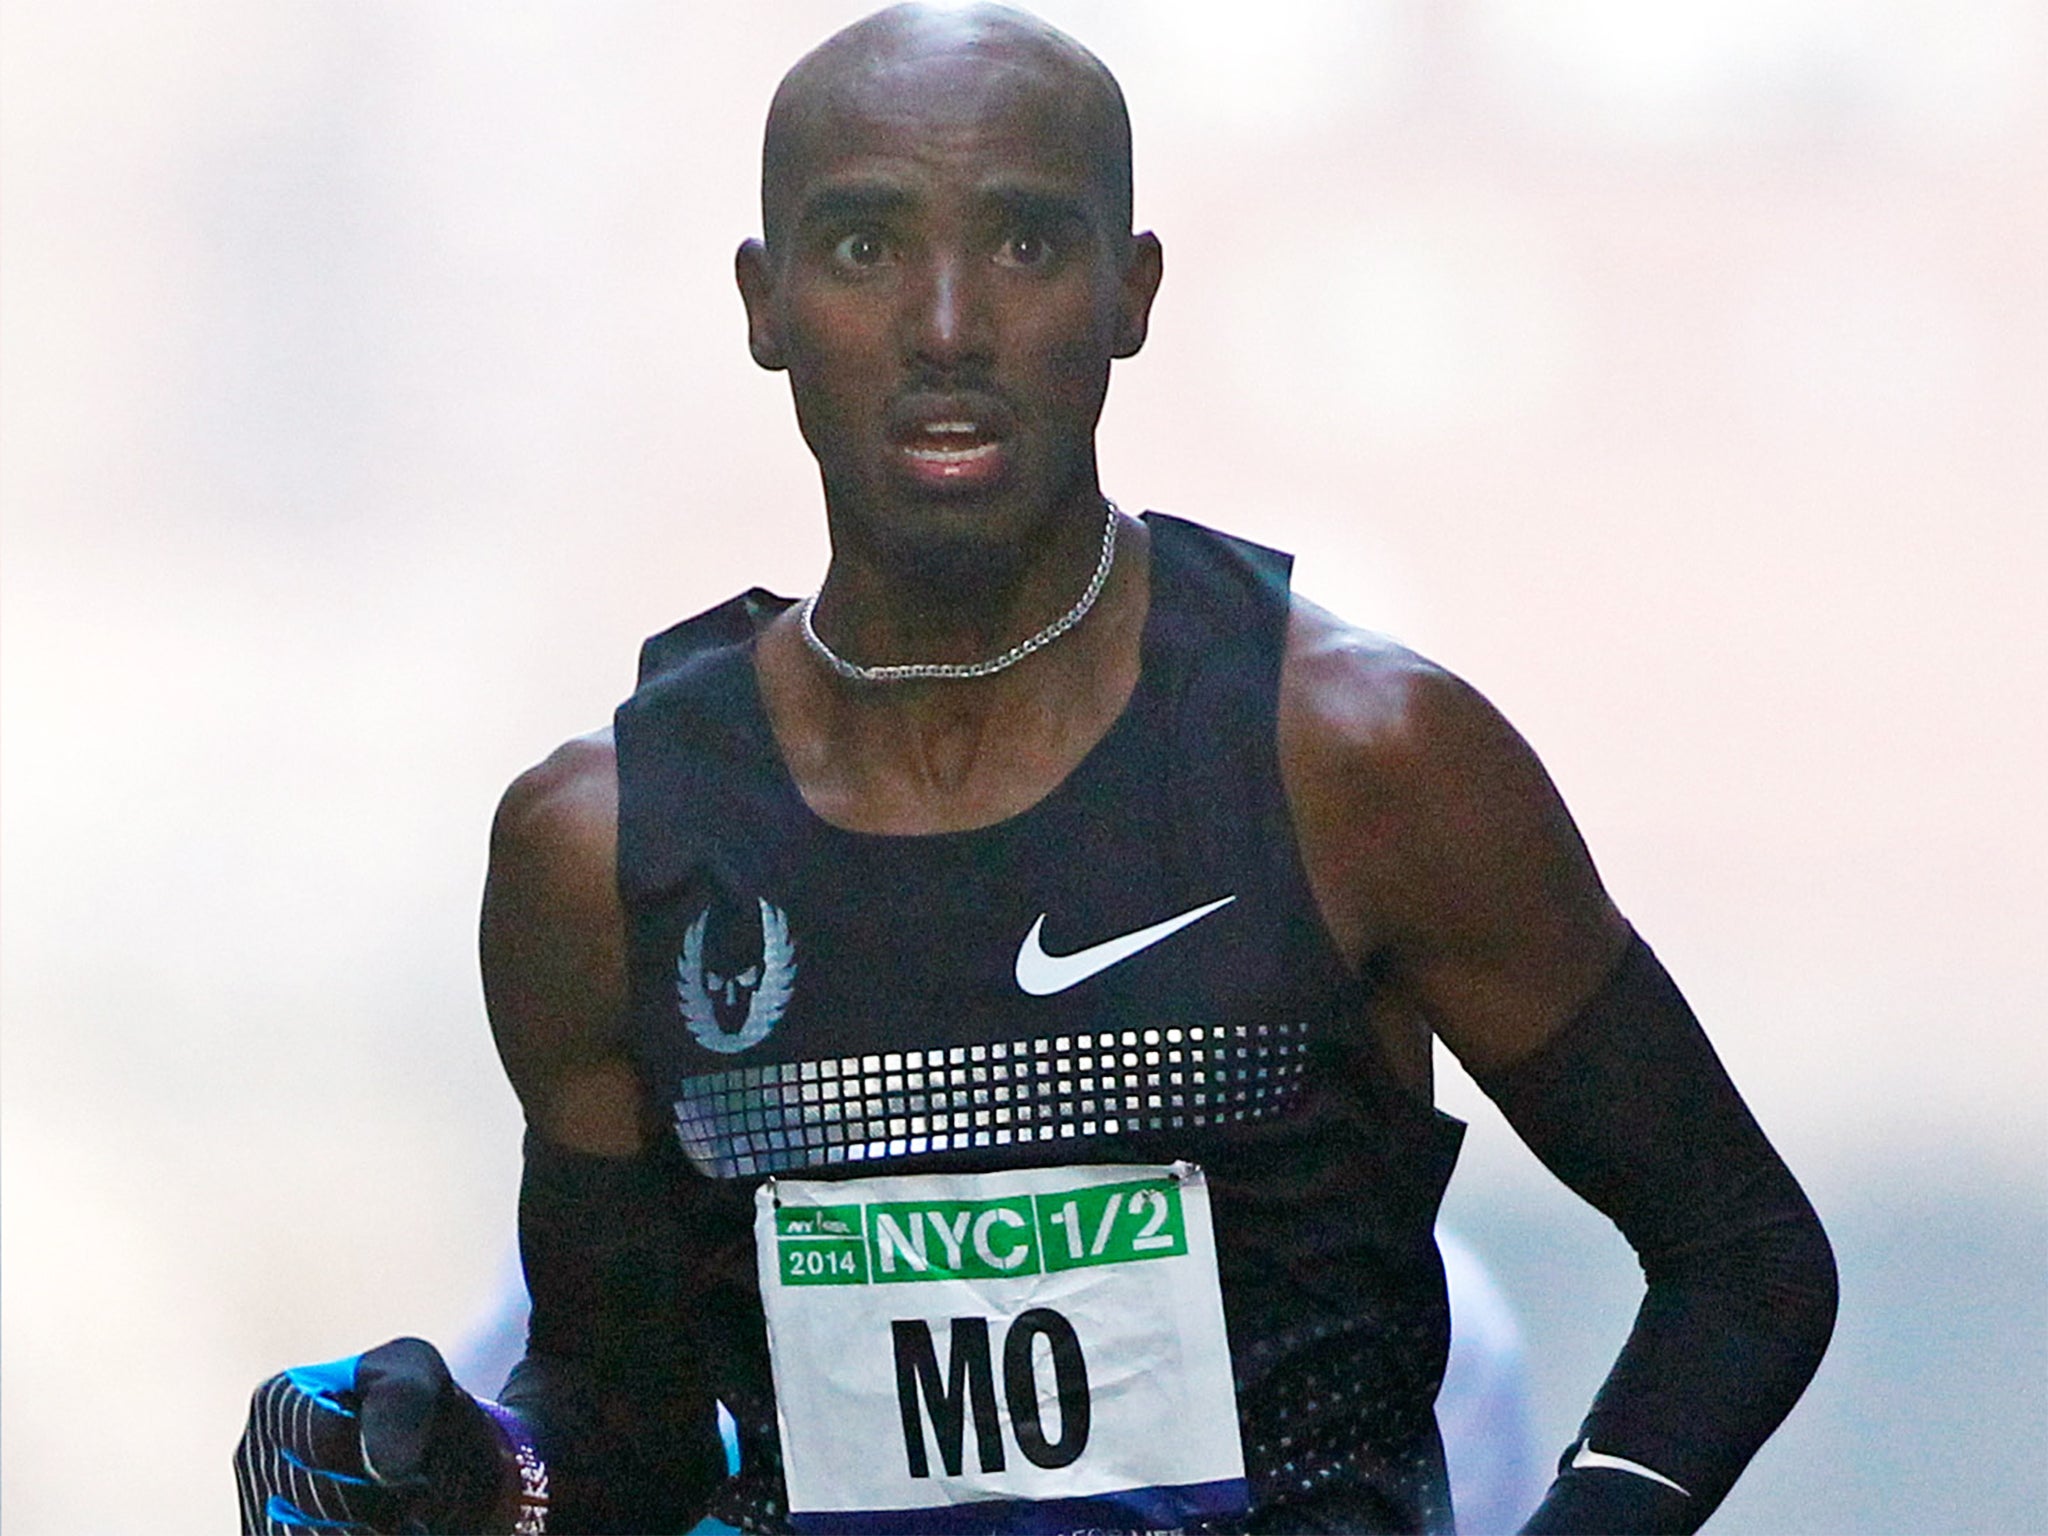 Mo Farah plans to compete in the 5,000m and the 10,000m at both Glasgow and Zurich